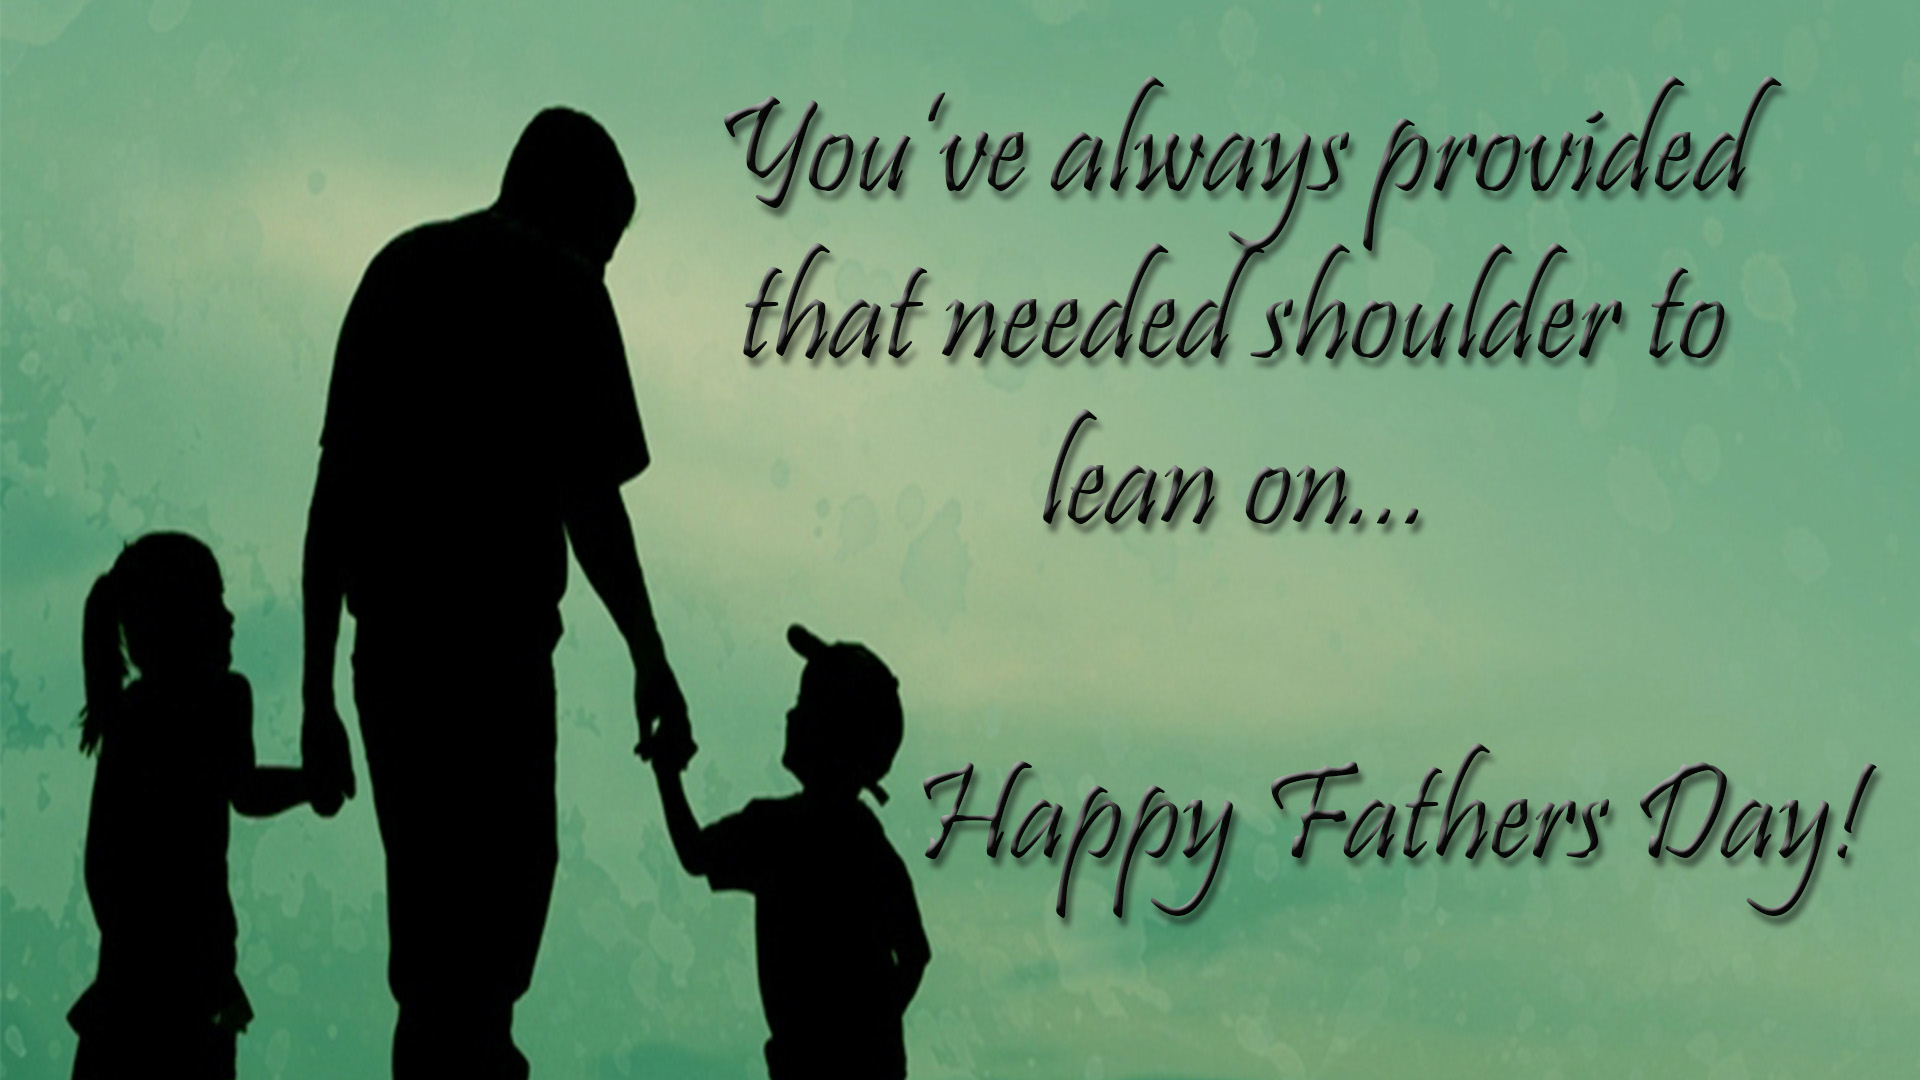 fathers day wishes image